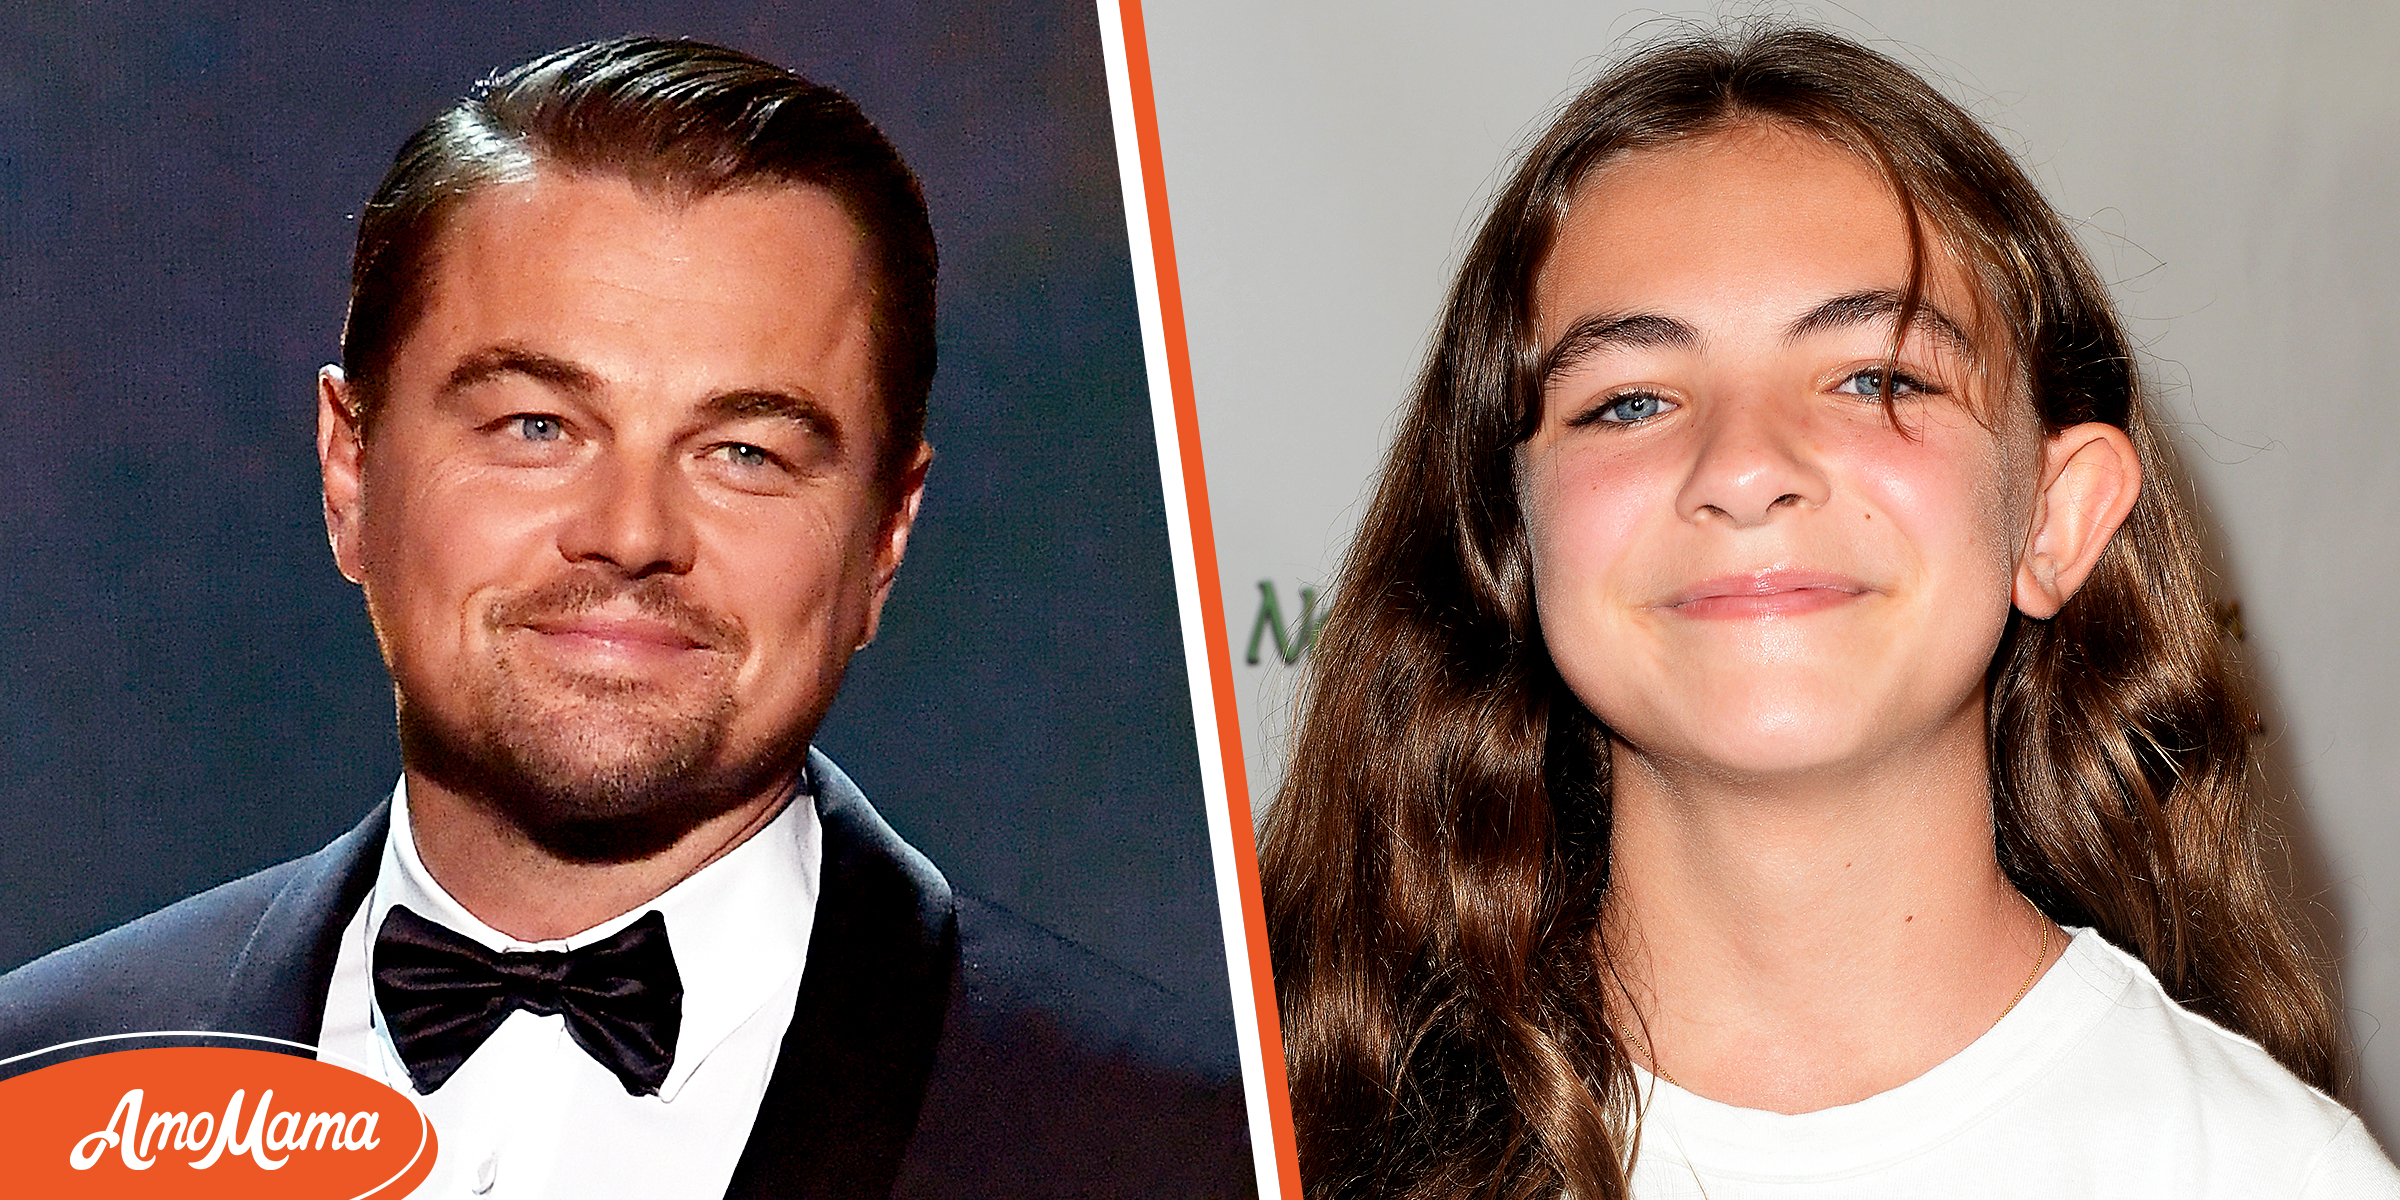 Leonardo DiCaprio’s Stepbrother Didn’t See His Child for Years While Actor Treats Her to Happy Holiday